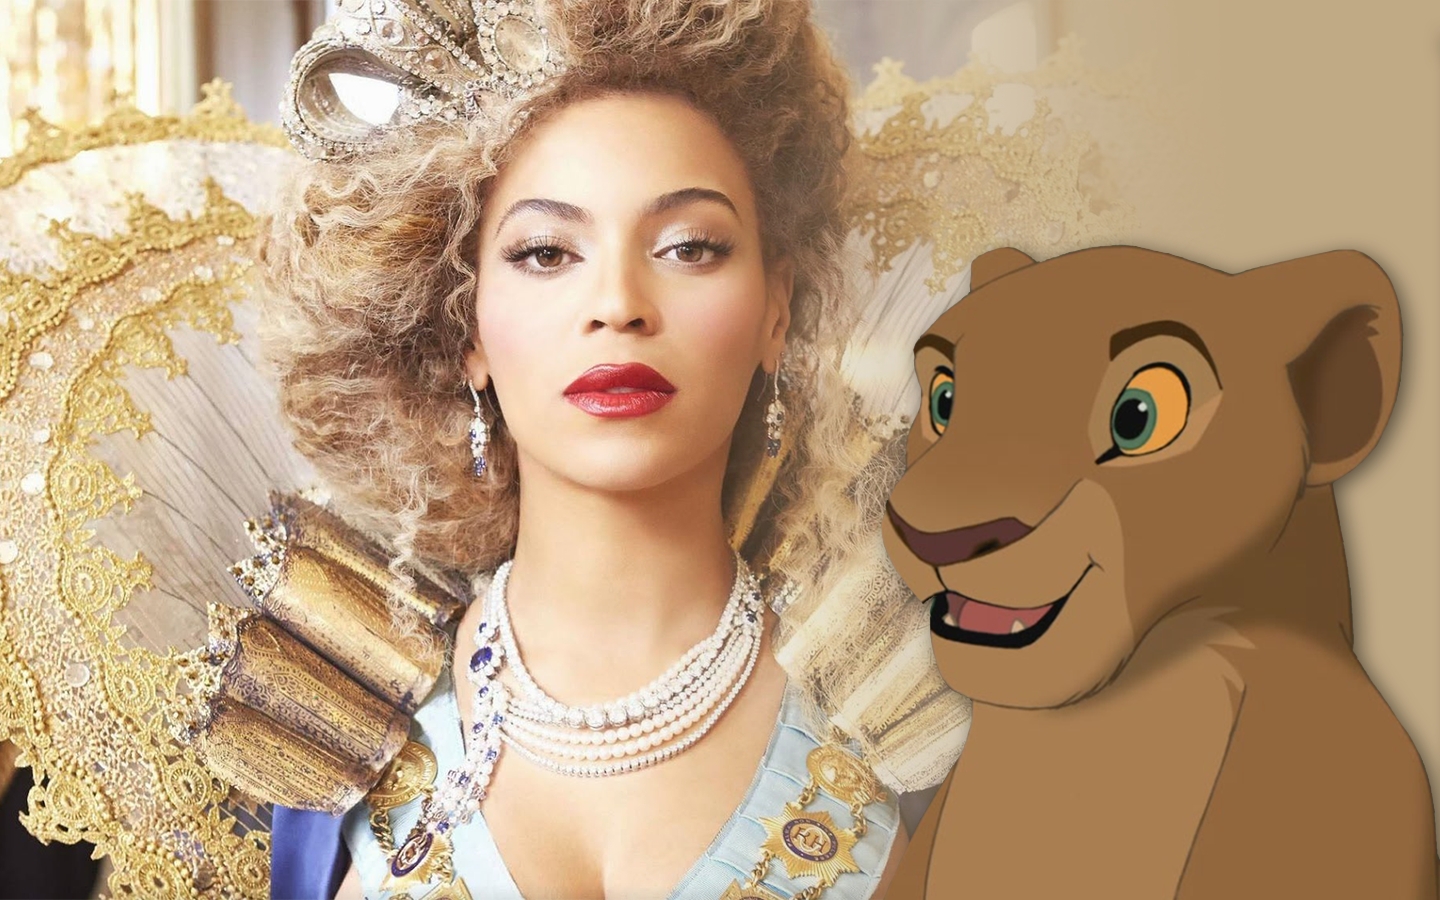 Beyonce The Top Choice to Voice Nala in the Upcoming ‘Lion King’ Remake